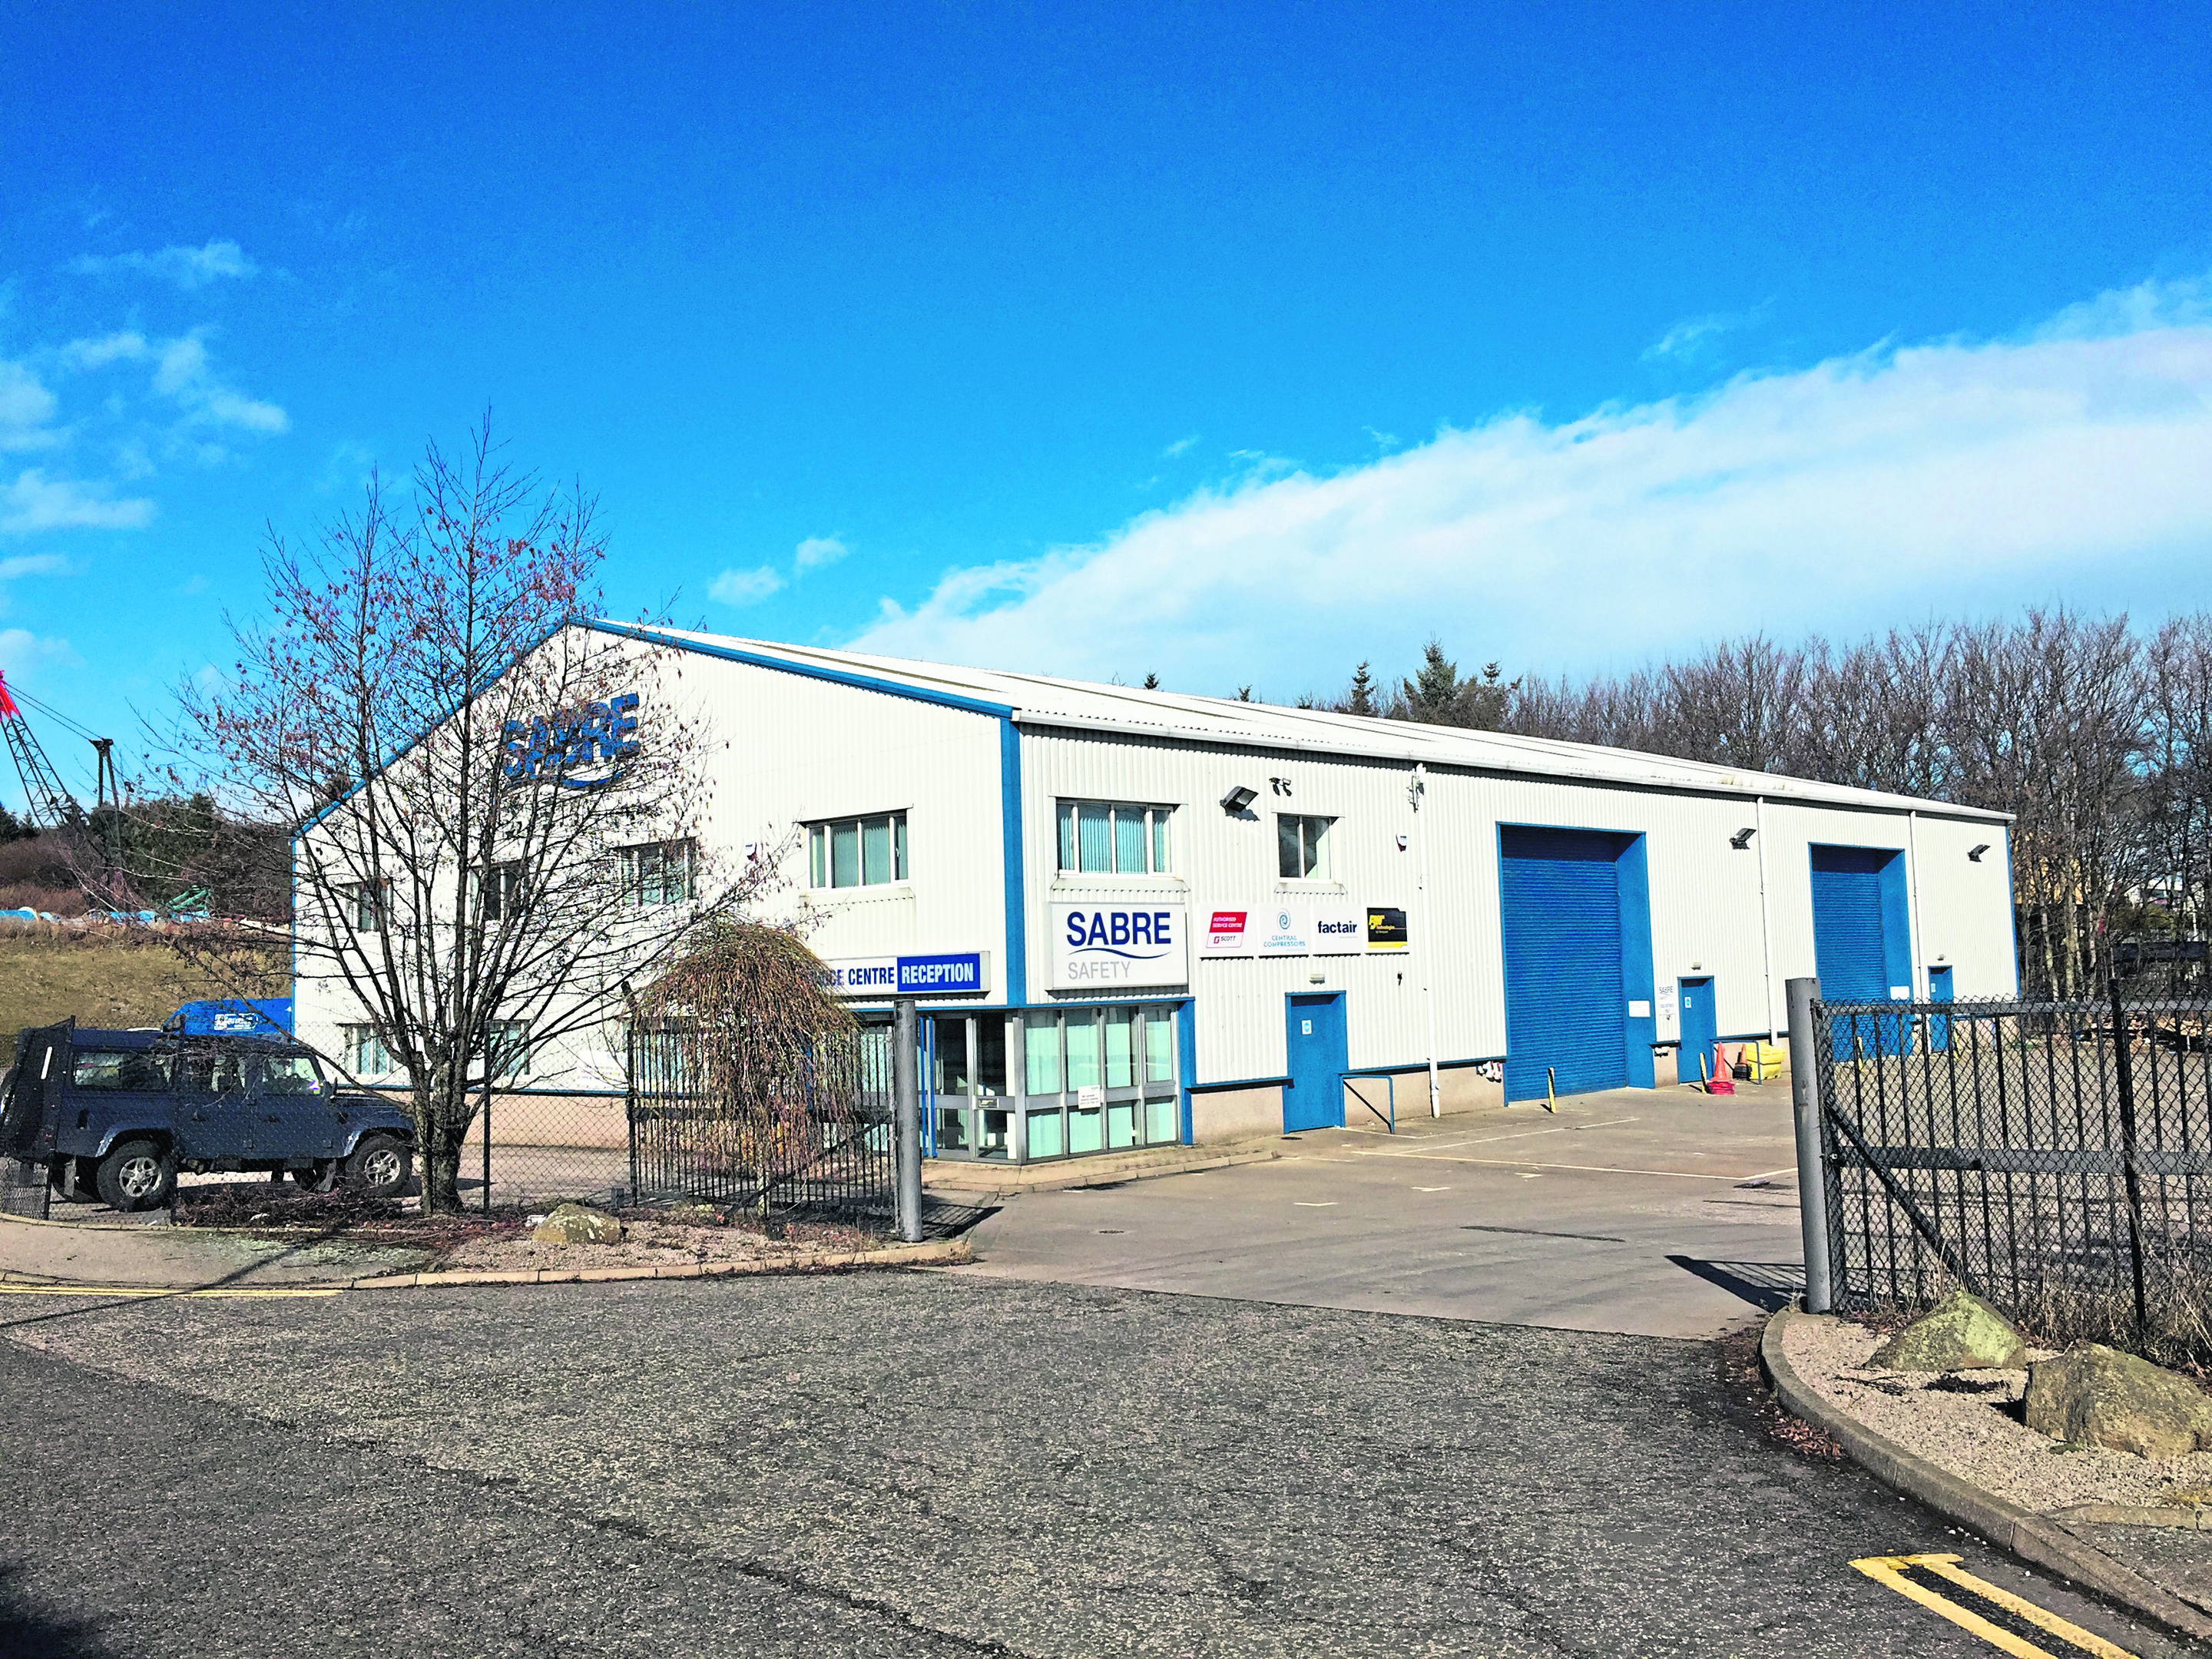 Industrial unit on Howemoss Drive
Business